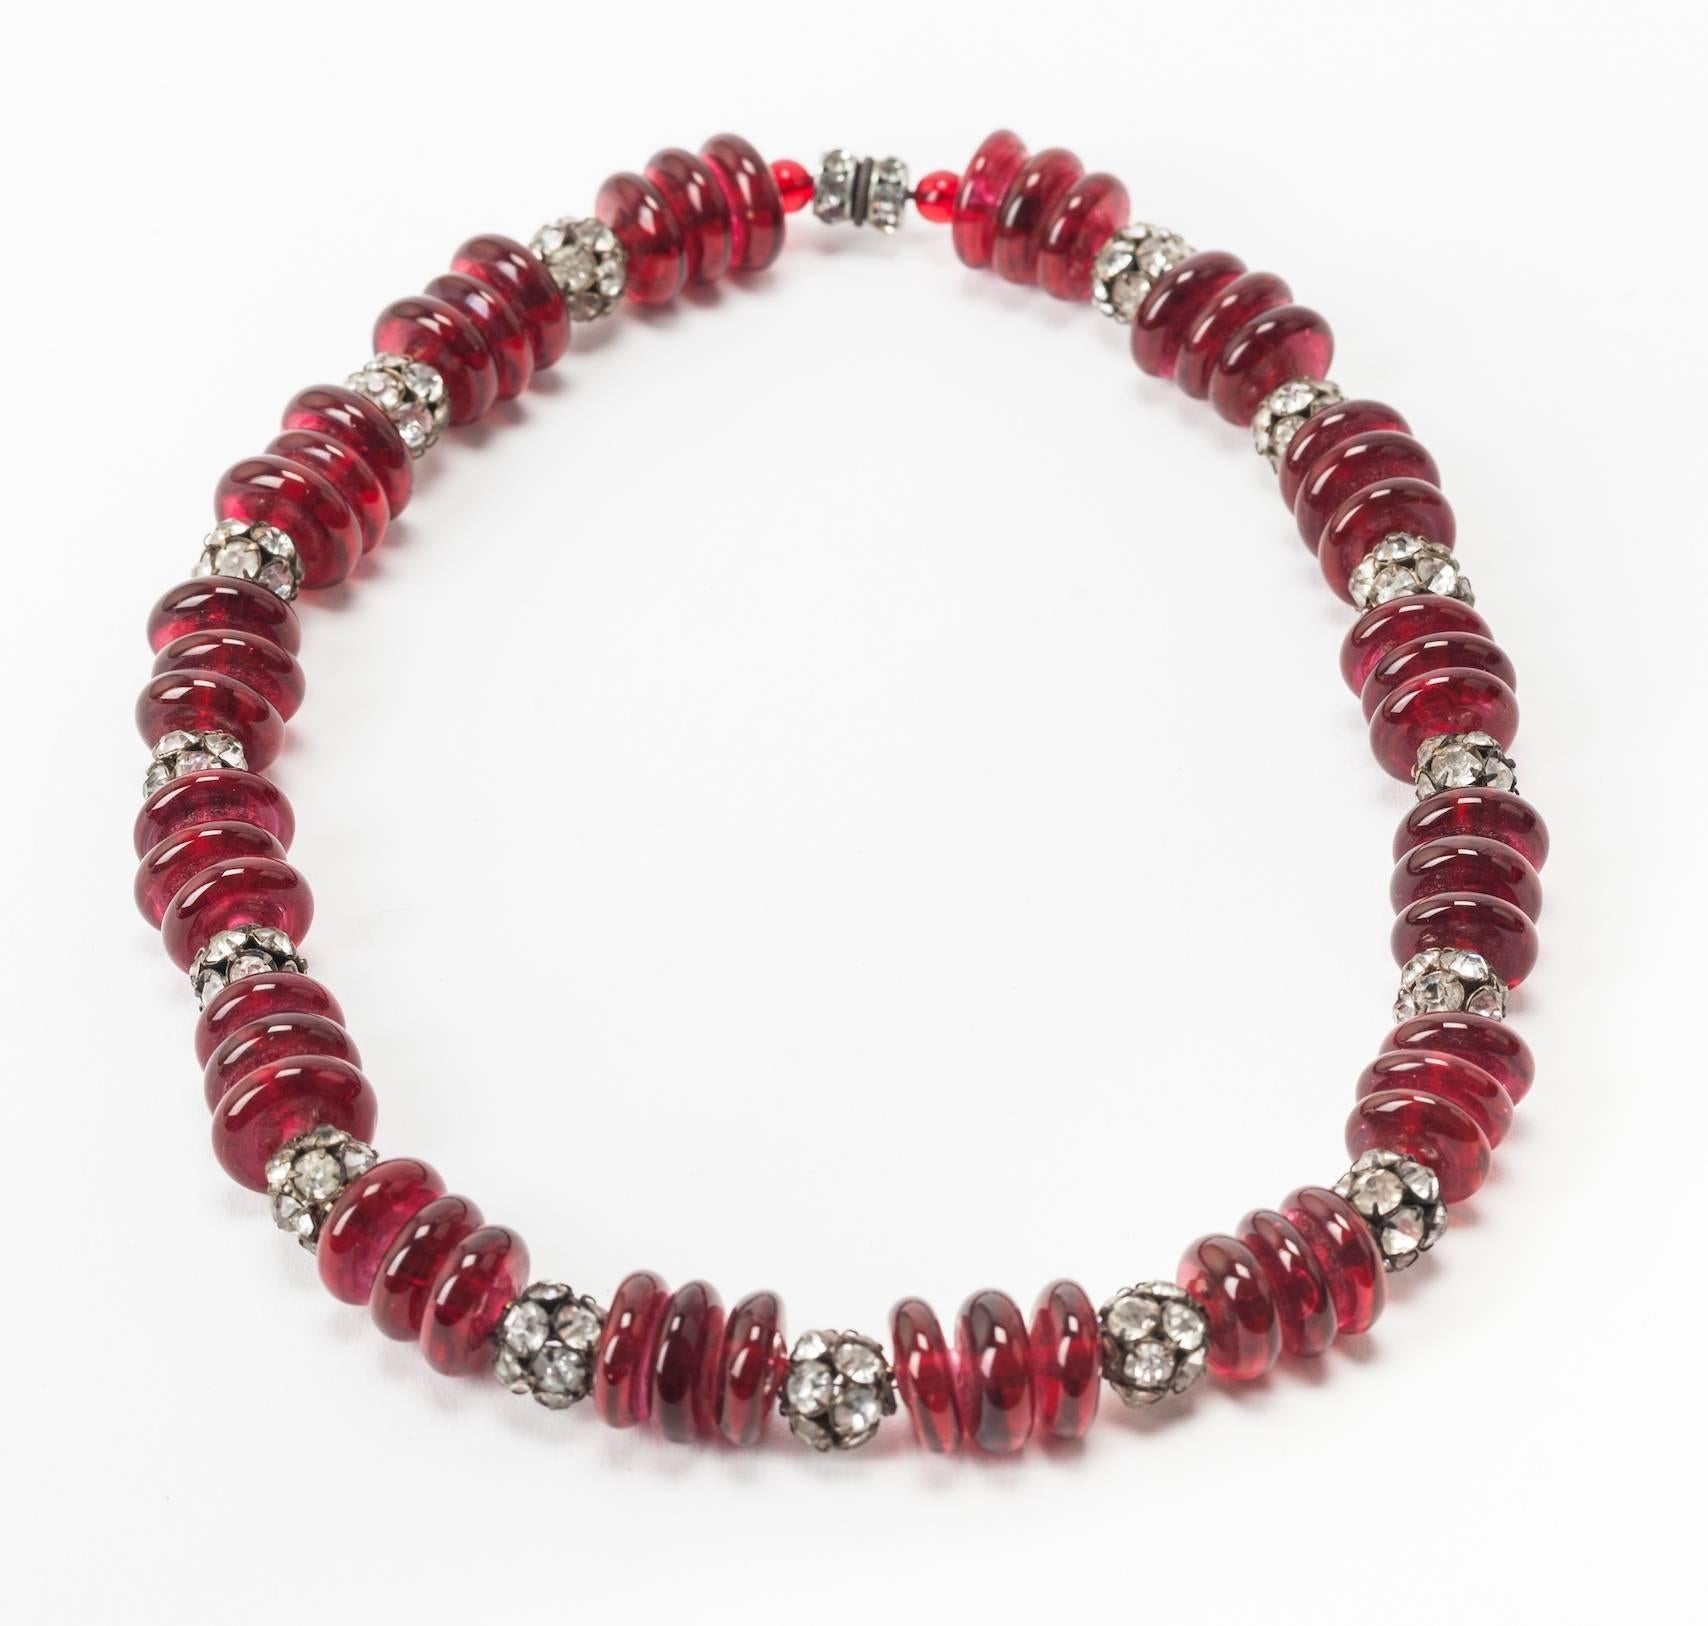 Art Deco Ruby pate de verre rondel bead necklace with pave ball spacers from Maison Gripoix. Hand made ruby glass rondels. 1920's France. Excellent condition. 